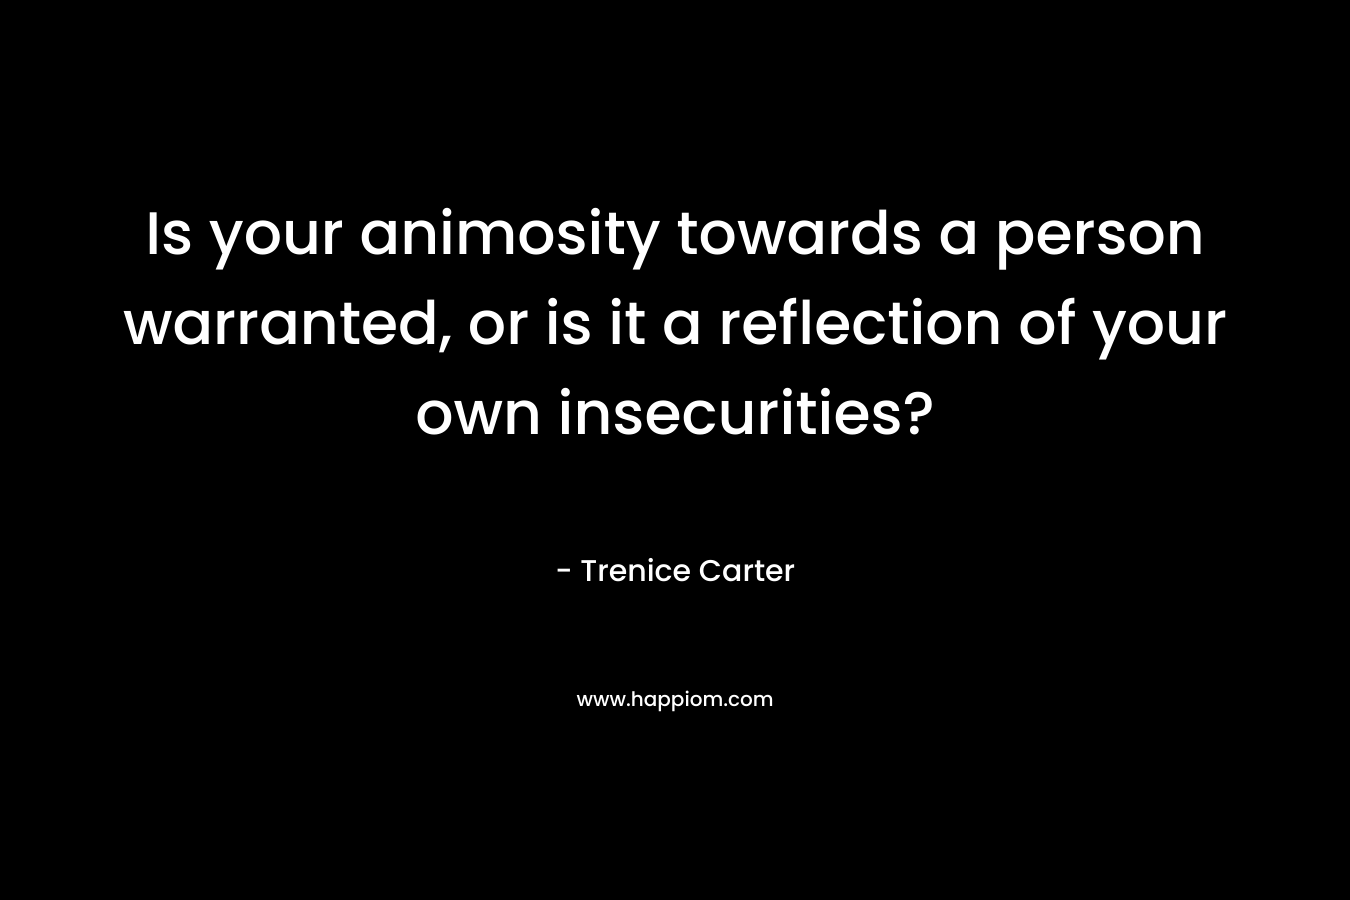 Is your animosity towards a person warranted, or is it a reflection of your own insecurities? – Trenice Carter